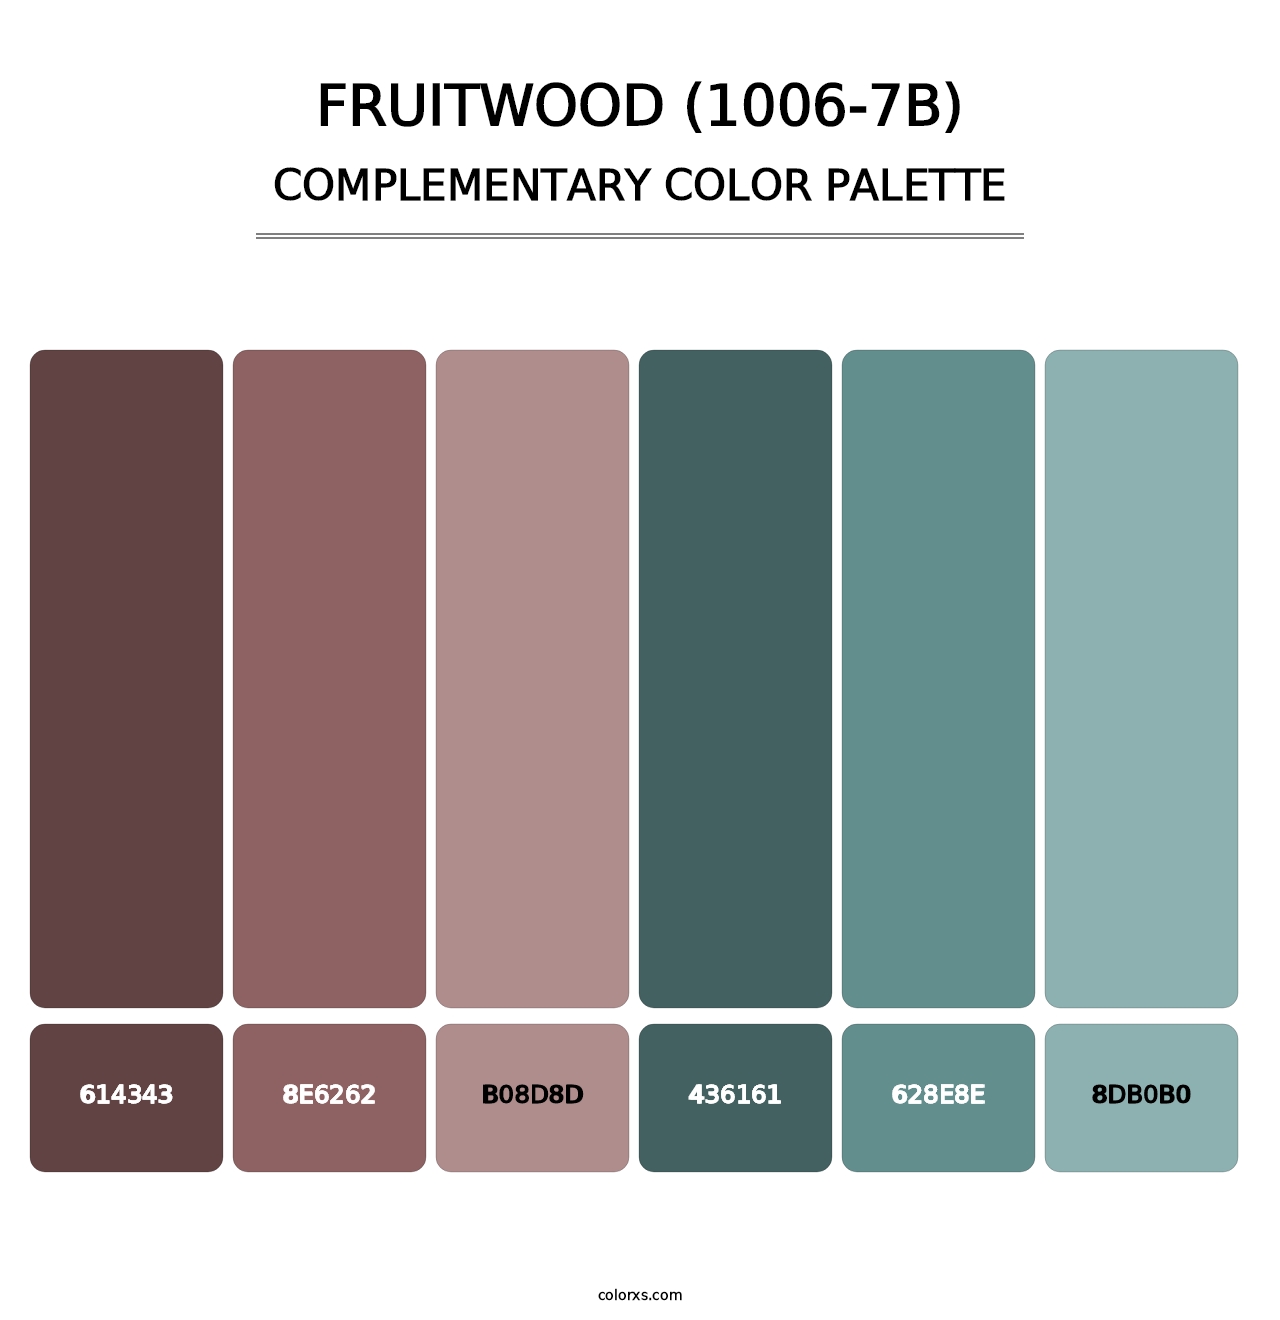 Fruitwood (1006-7B) - Complementary Color Palette